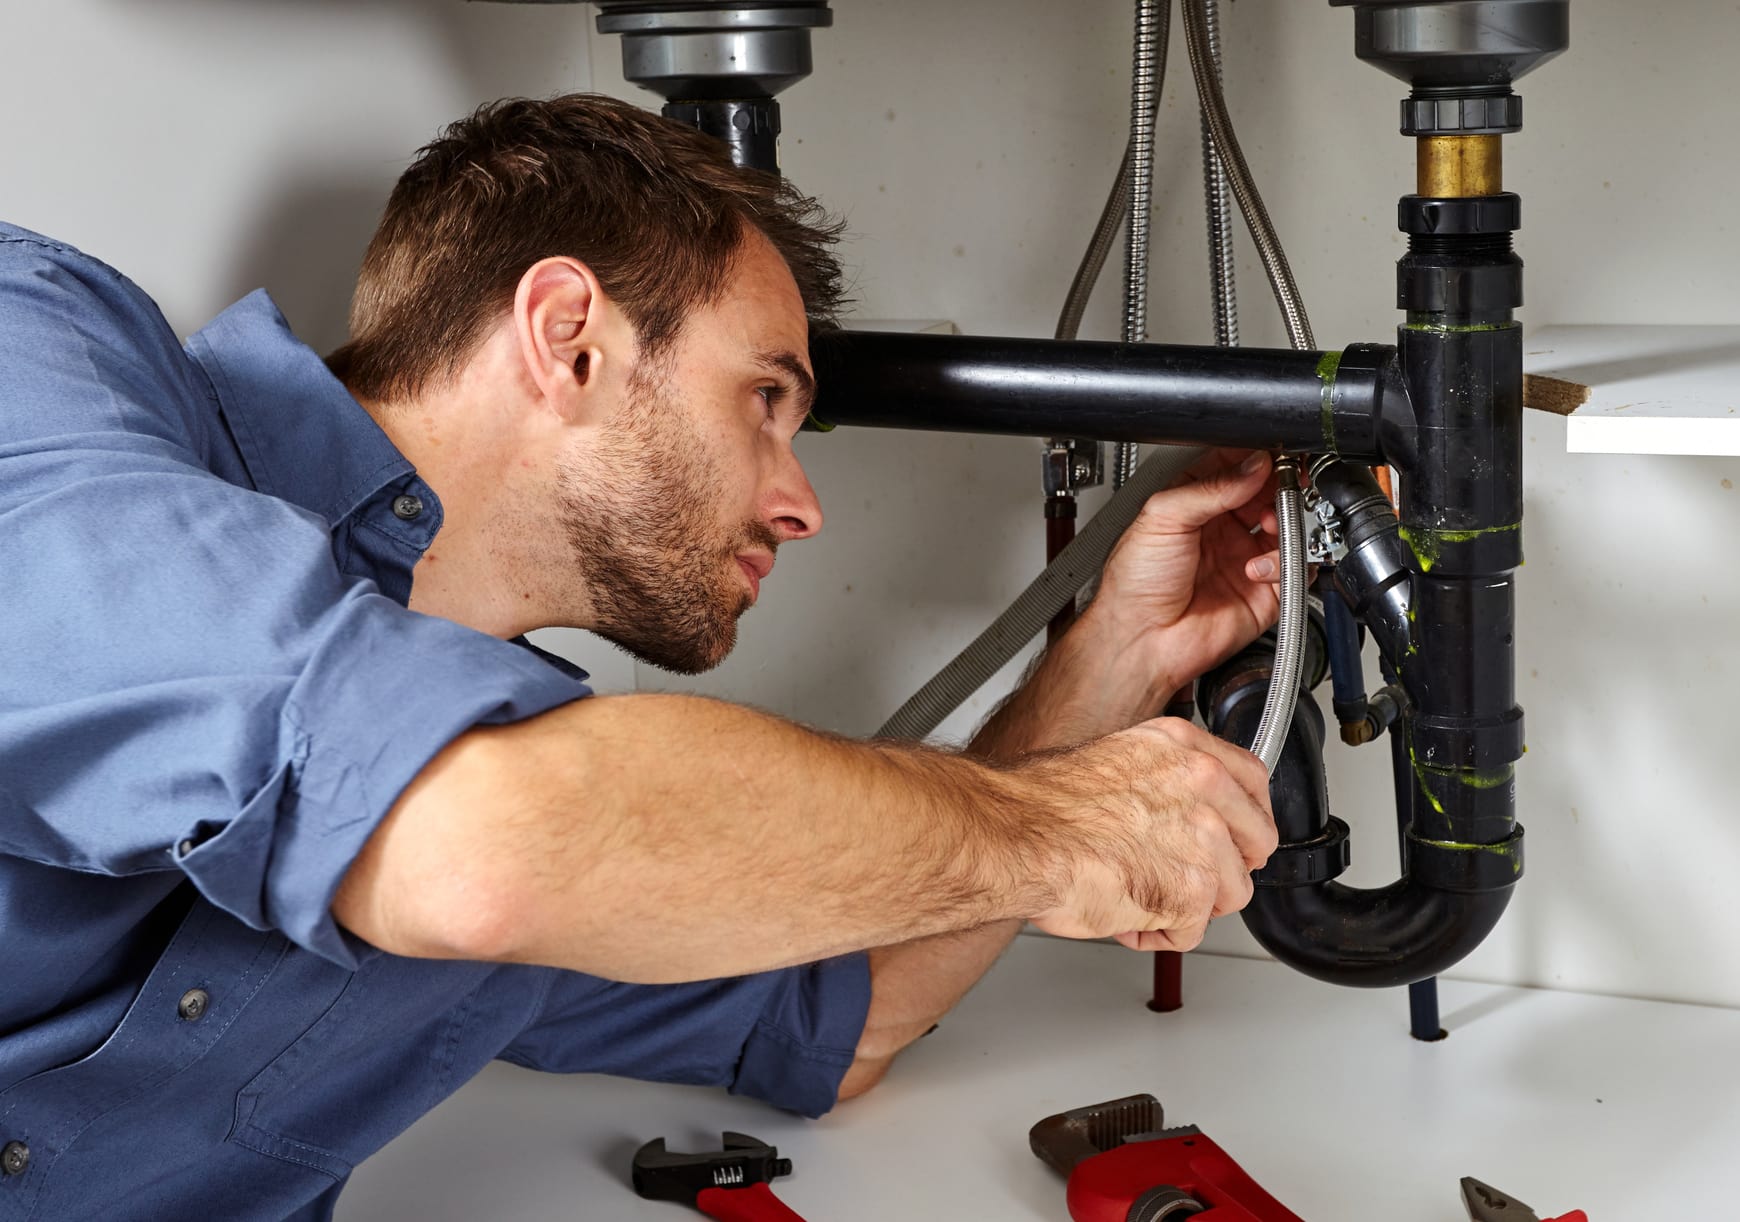 How To Hire A Plumber 8 Questions To Ask